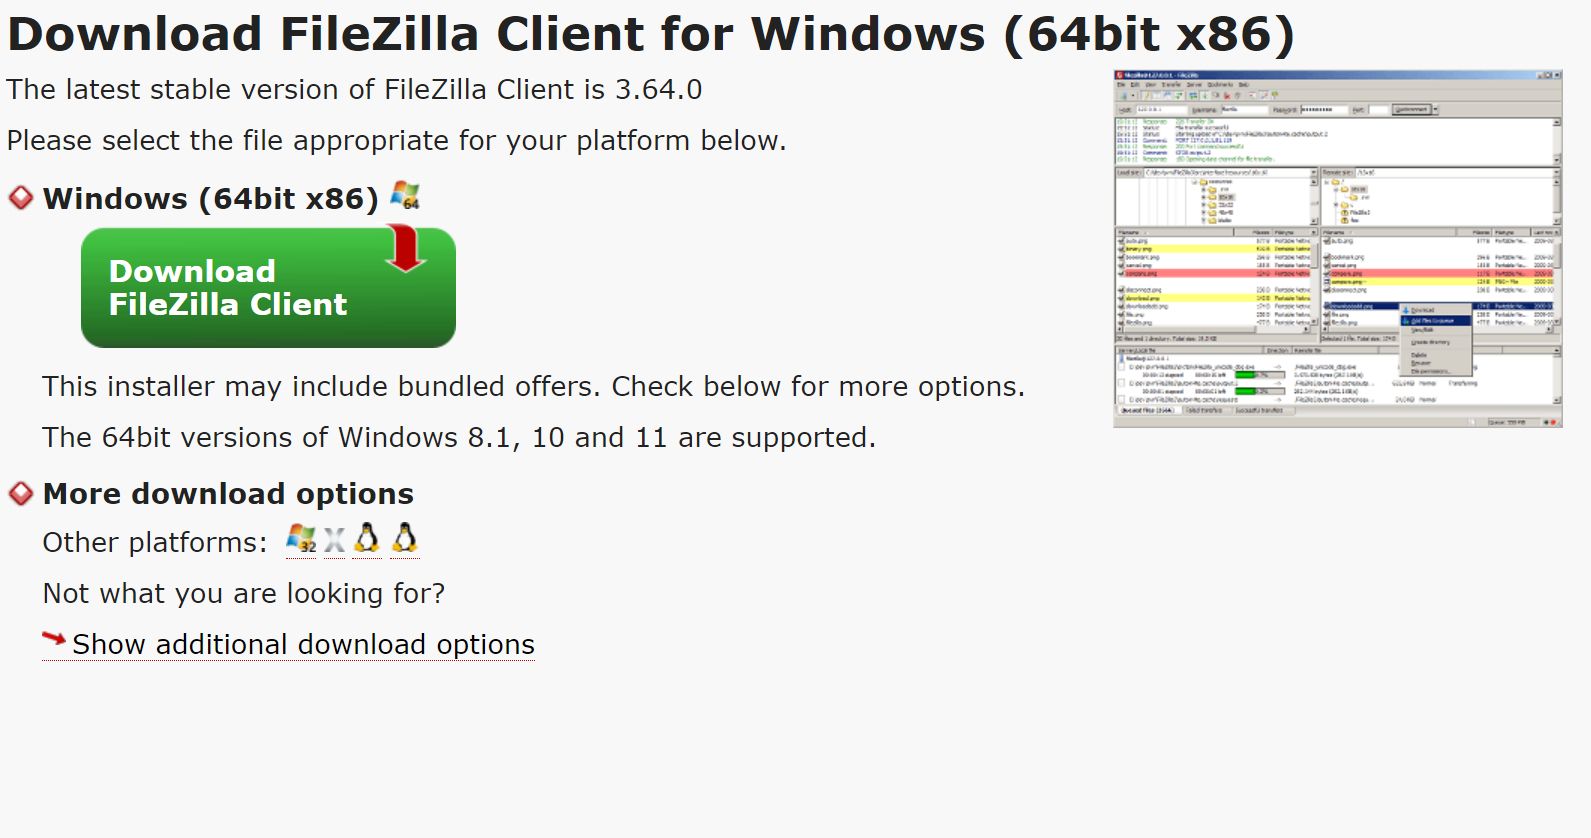 Before downloading FileZilla, you’re given options for various operating systems.